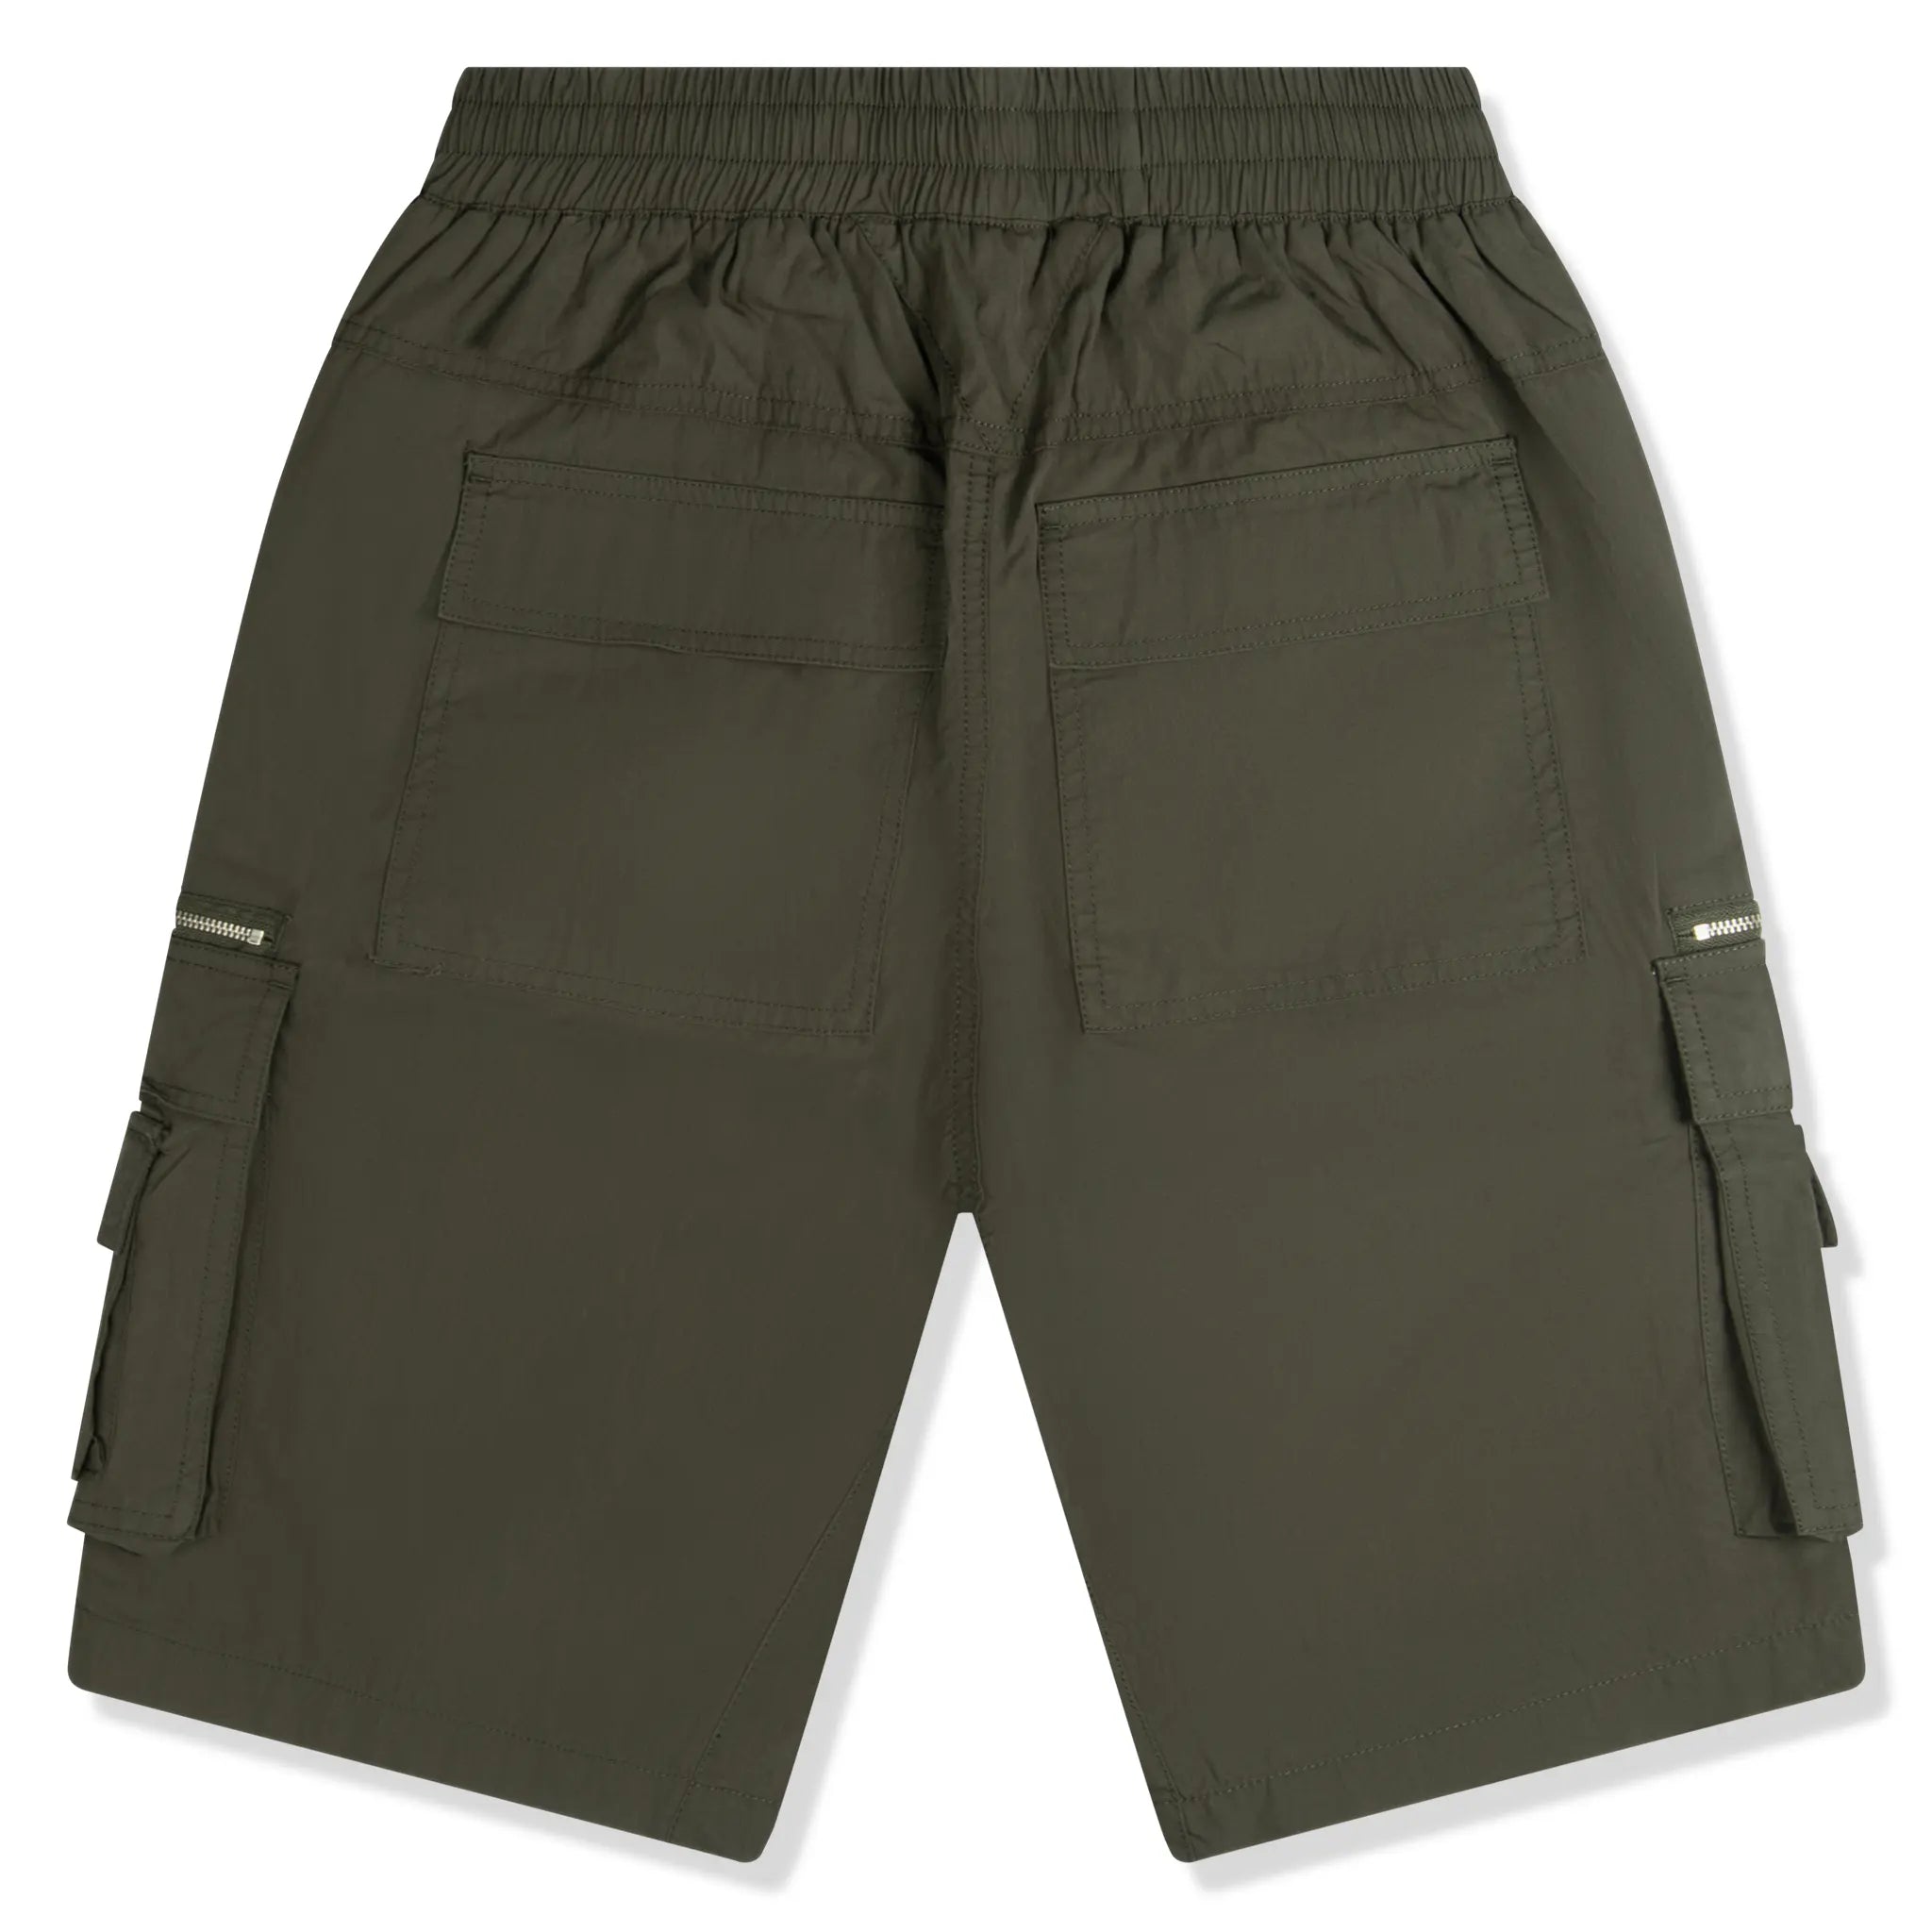 Back view of SIARR Military Shorts Dark Green